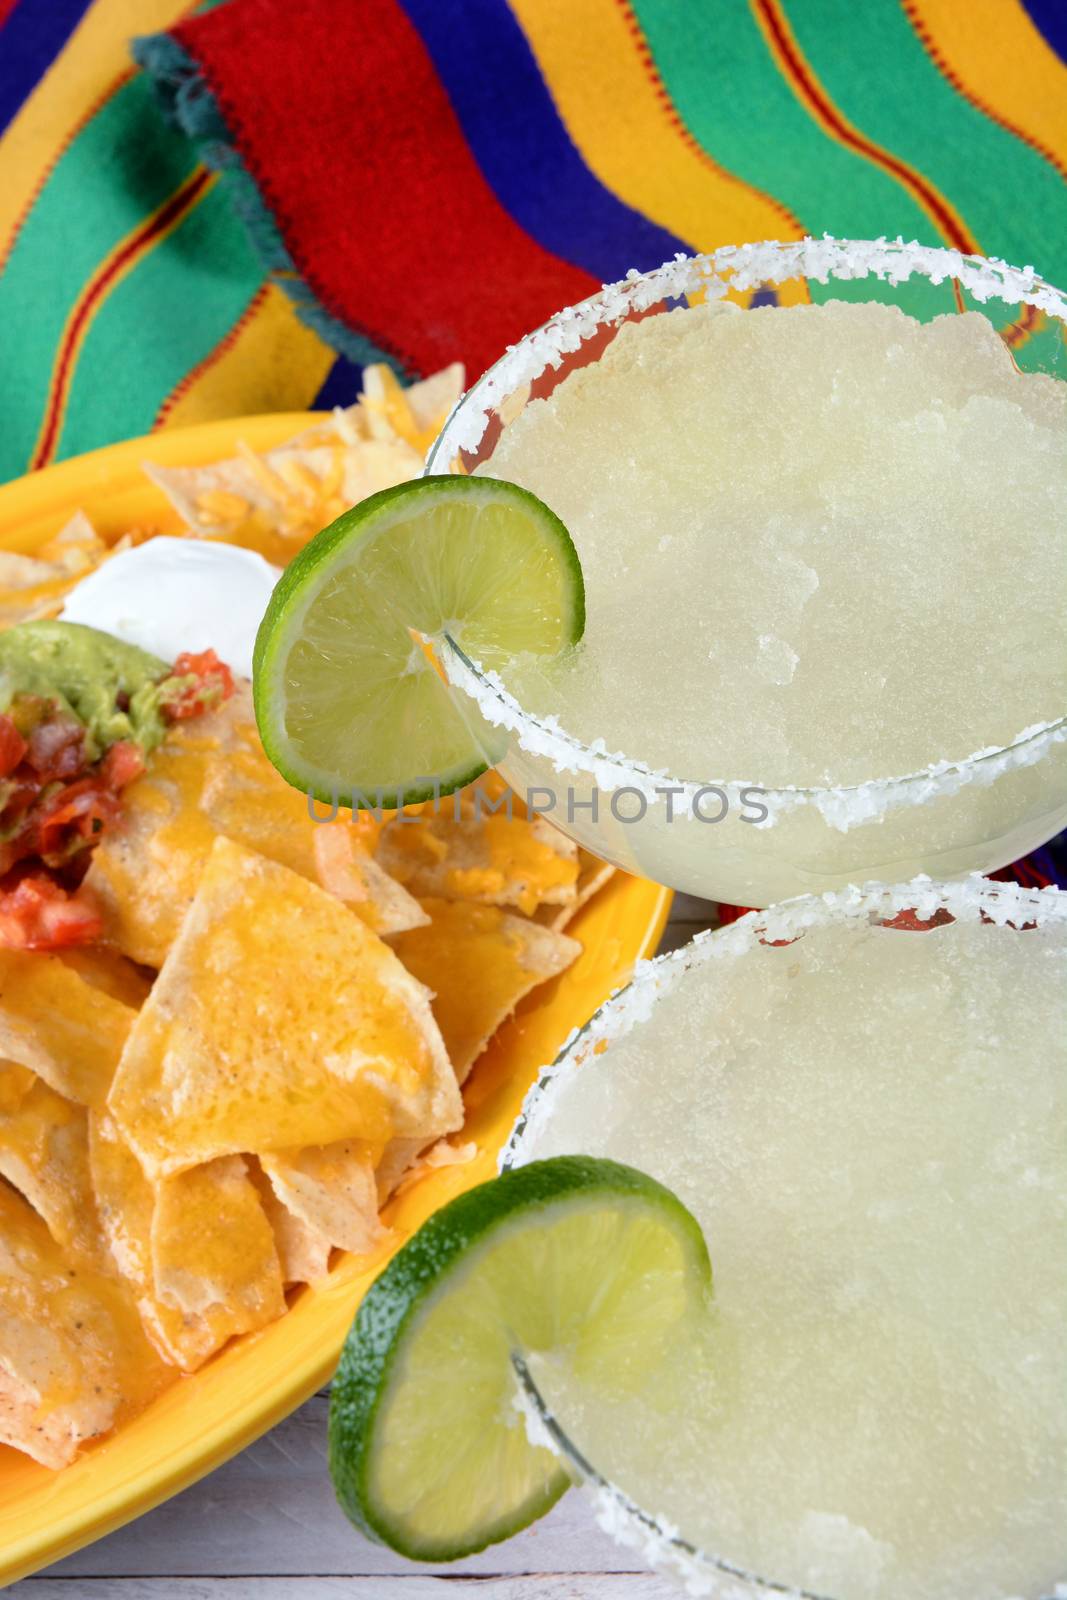 Cinco de Mayo Concept: Margaritas and Mexican food on a colorful  table cloth.